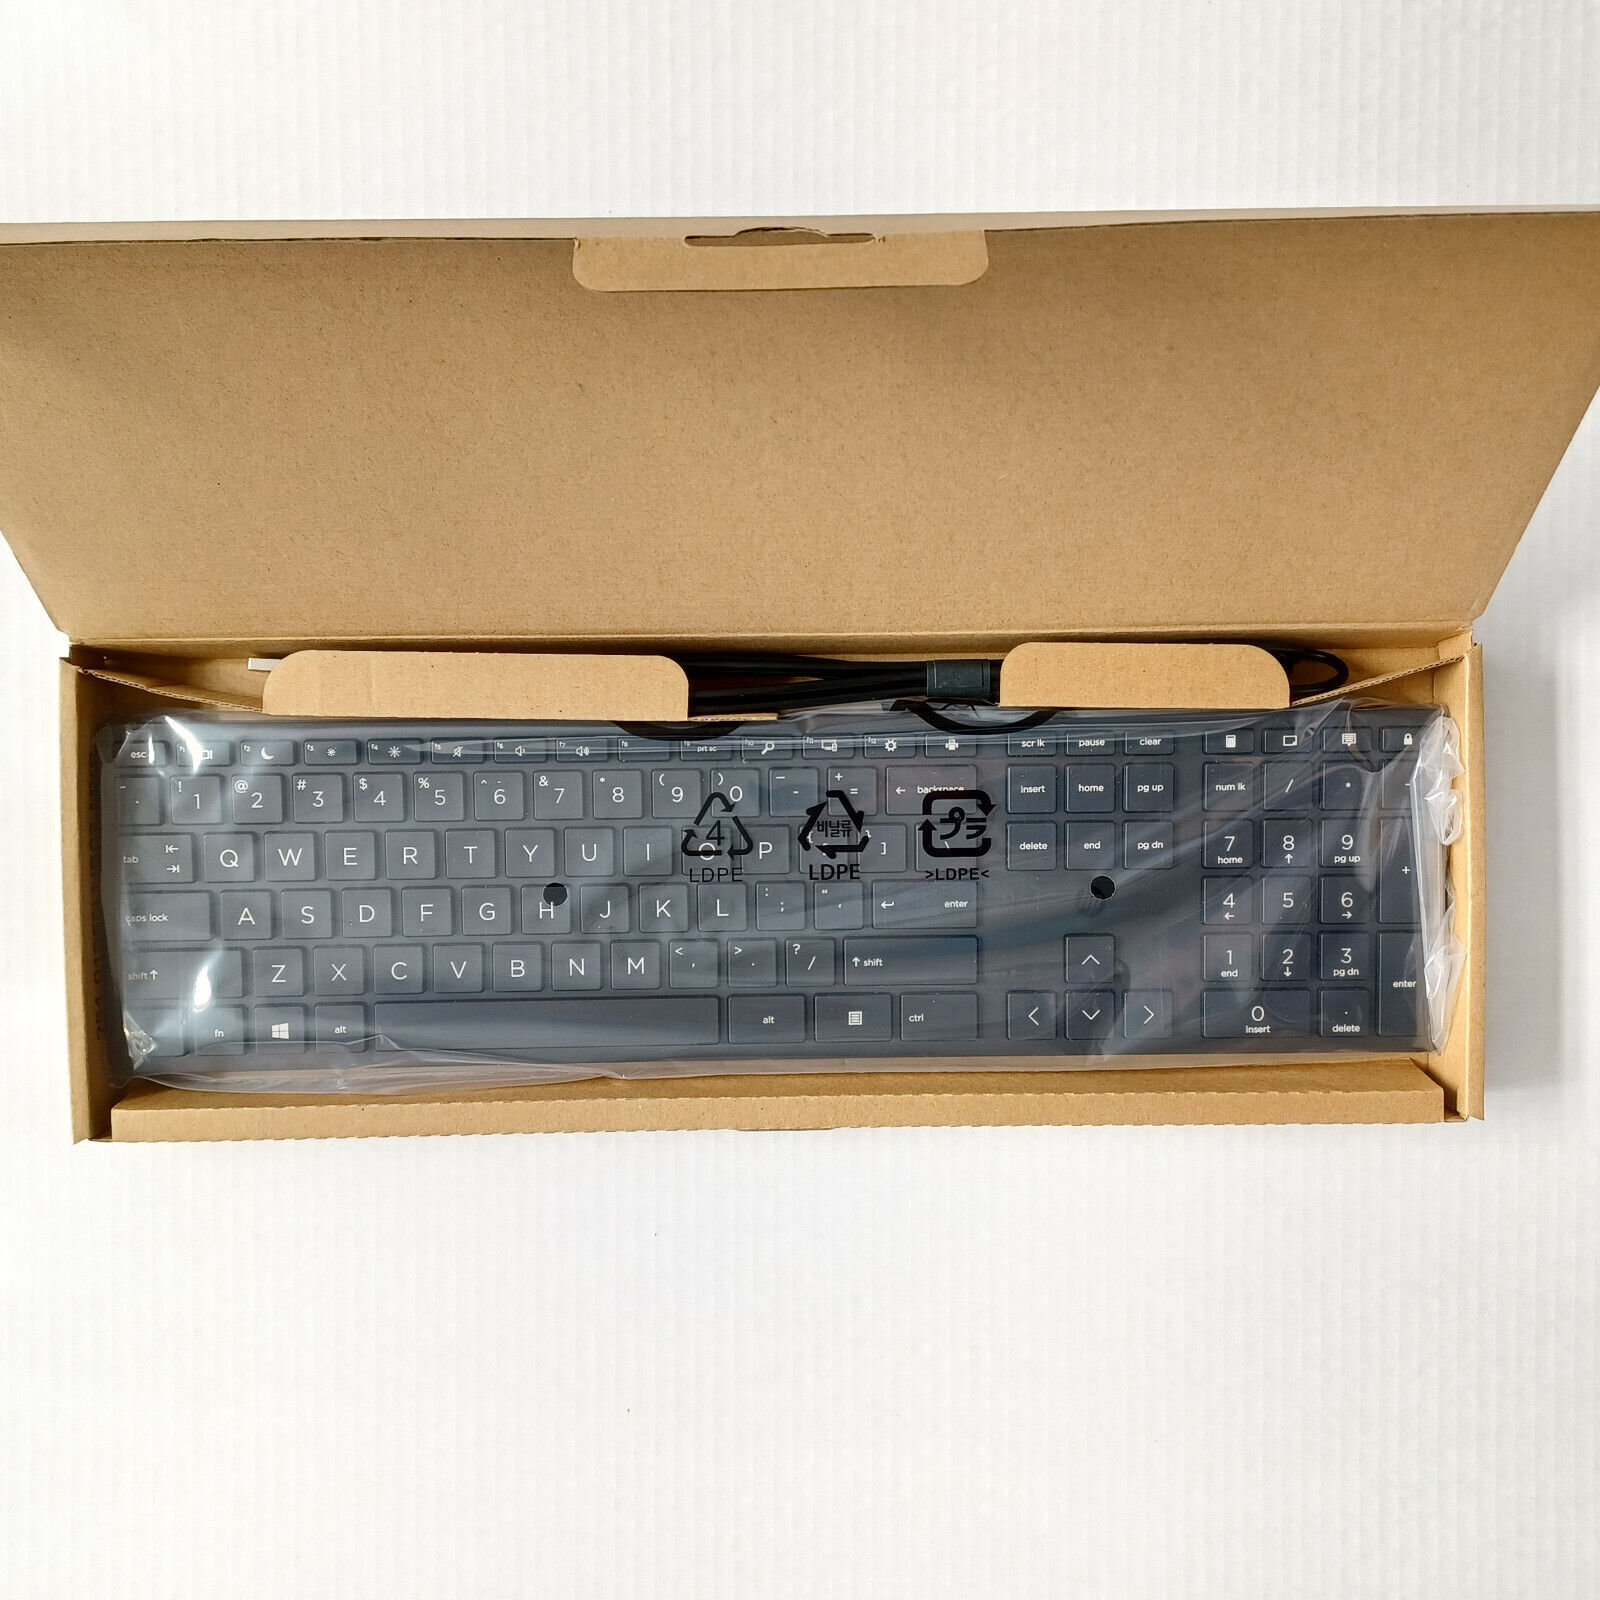 New HP Desktop 320K Slim Wired Halley USB Keyboard L96909-001 . Available Now for 16.20